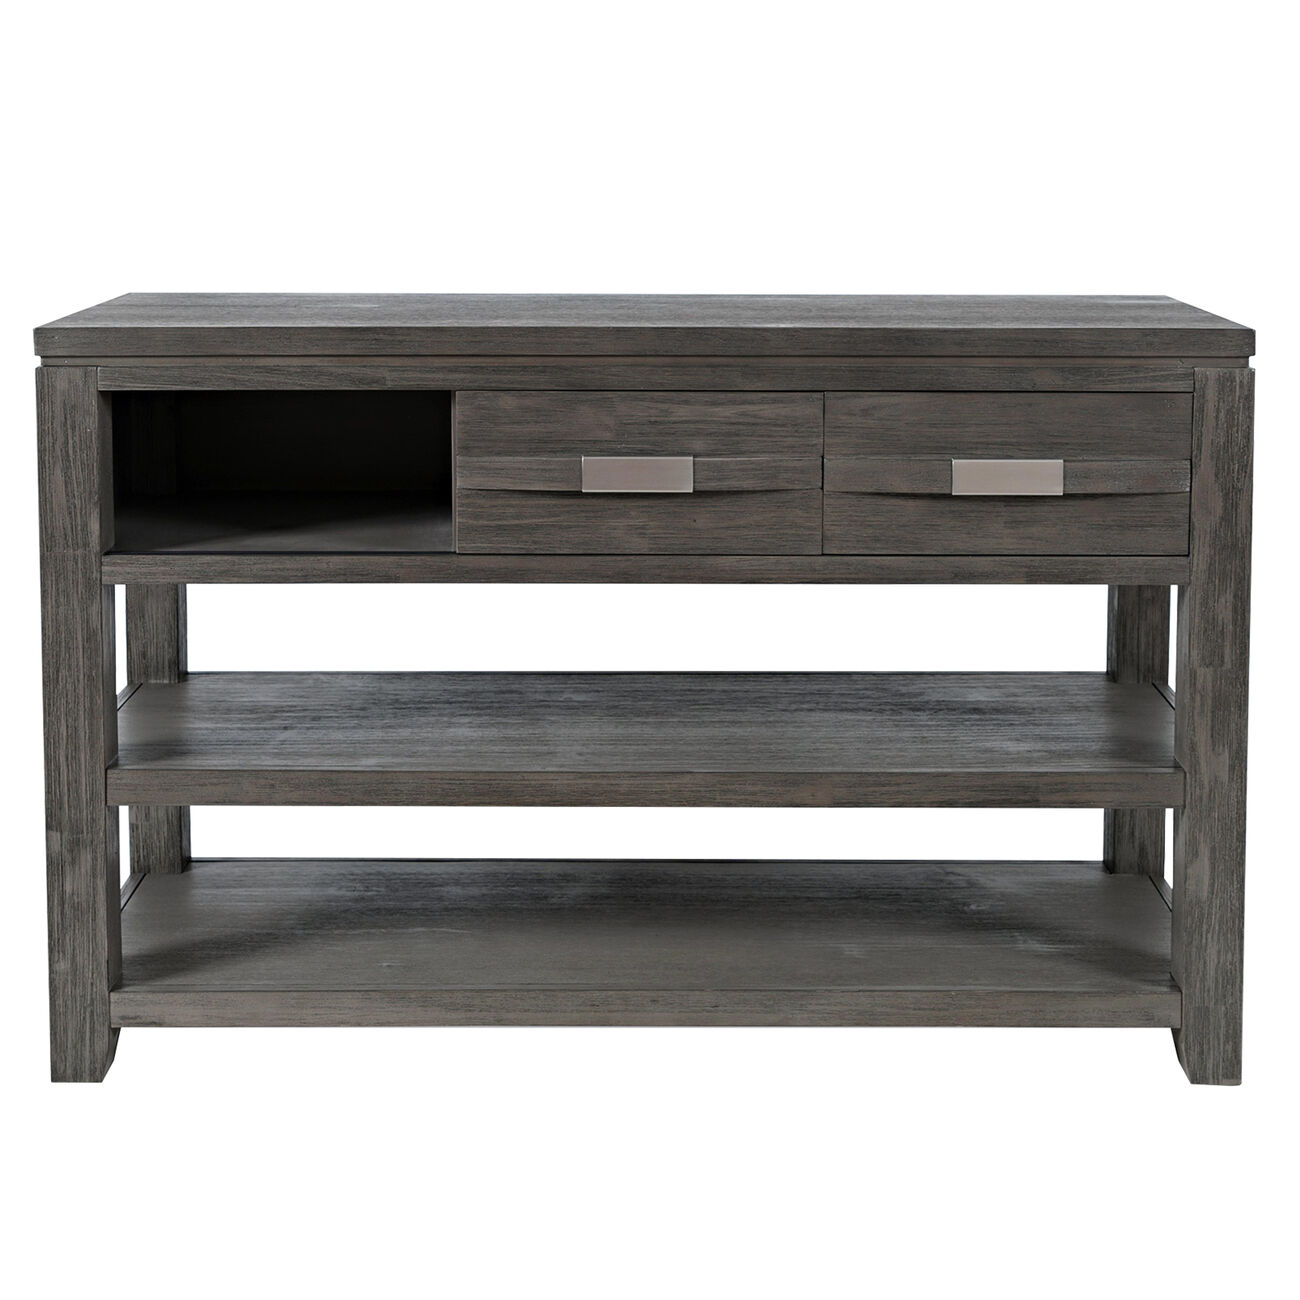 Wooden Sofa Table with 3 Open Compartments and 2 Sliding Doors, Light Gray 